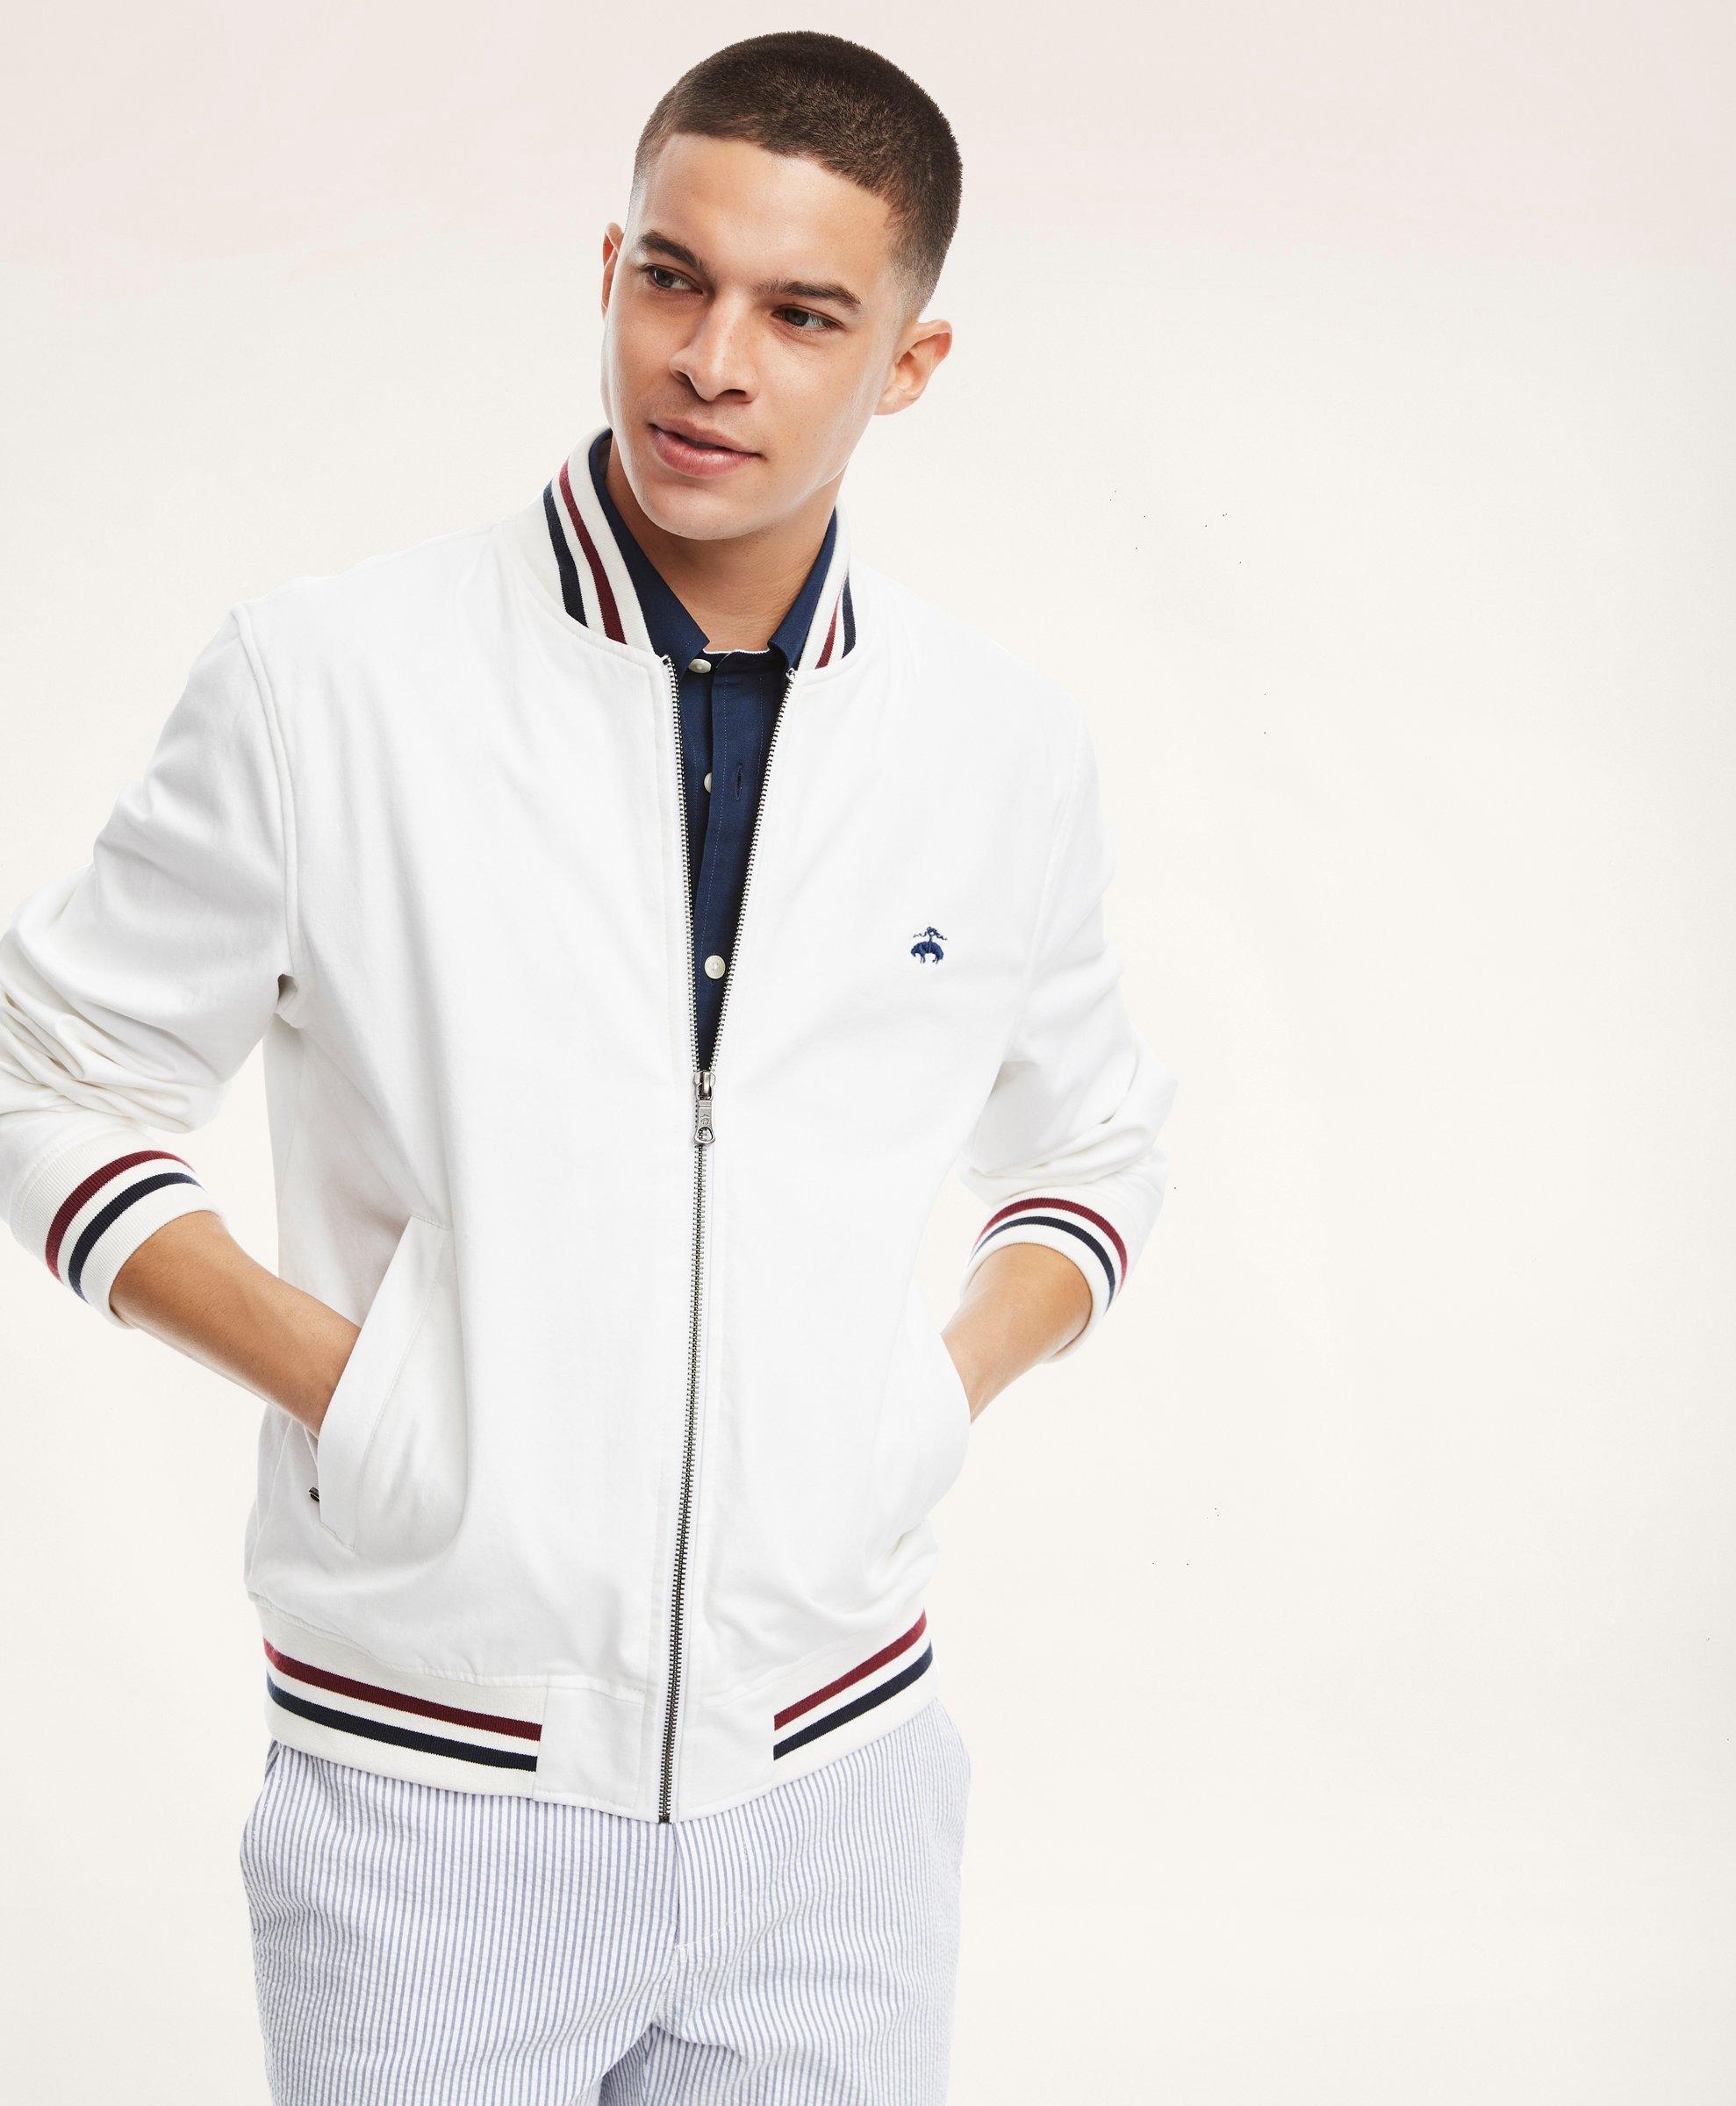 Brooks Brothers and FILA Collab Blends American Style with Tennis Gear